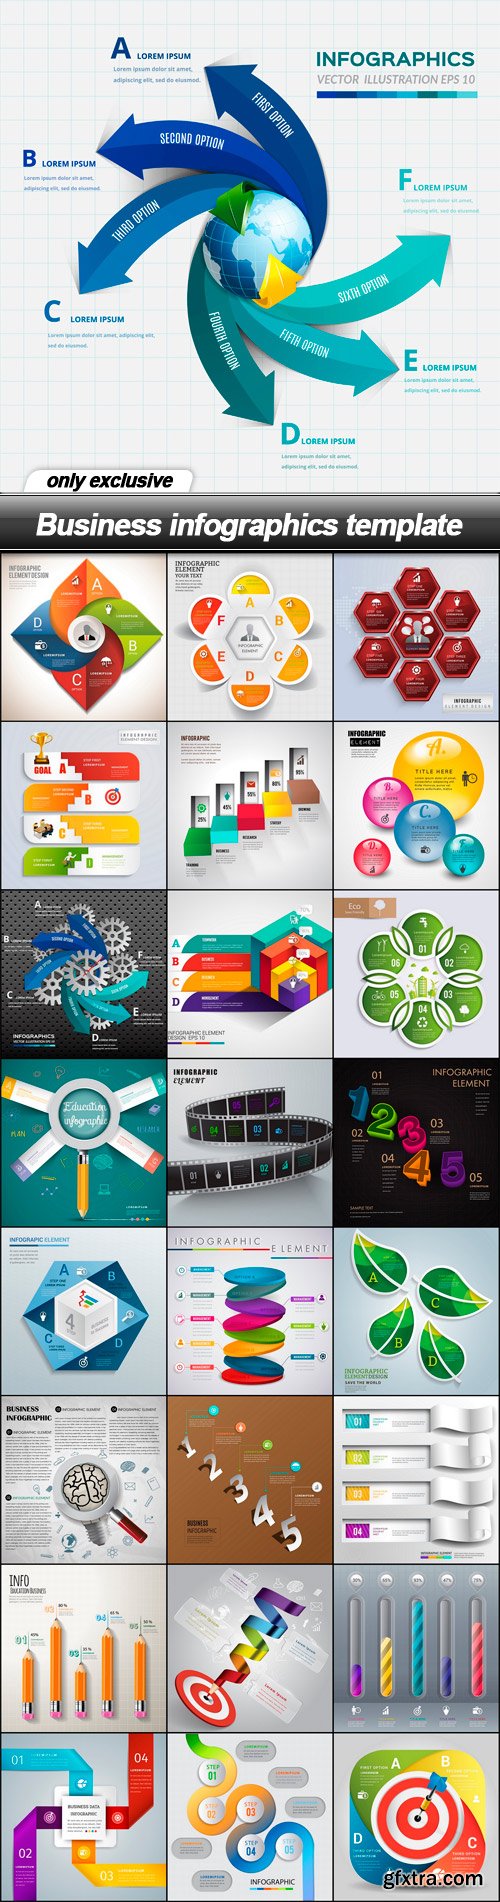 Business infographics template - 25 EPS